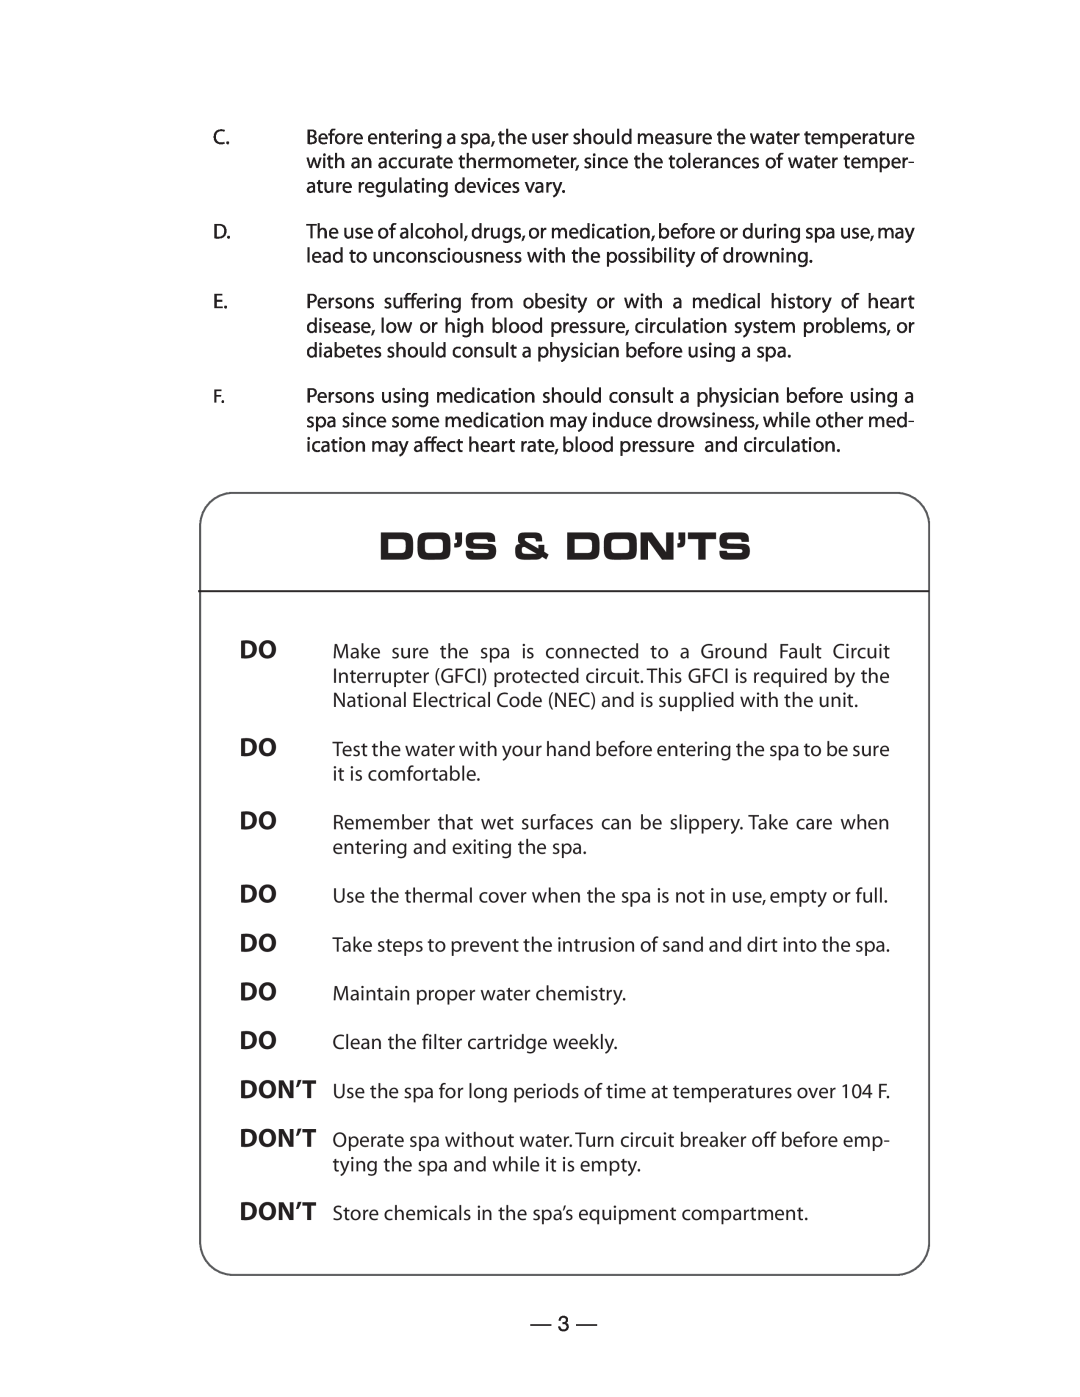 Vita Spa U -1 3 0 manual Do’S & Don’Ts, Do Do Do Do Do, Do Don’T Don’T 